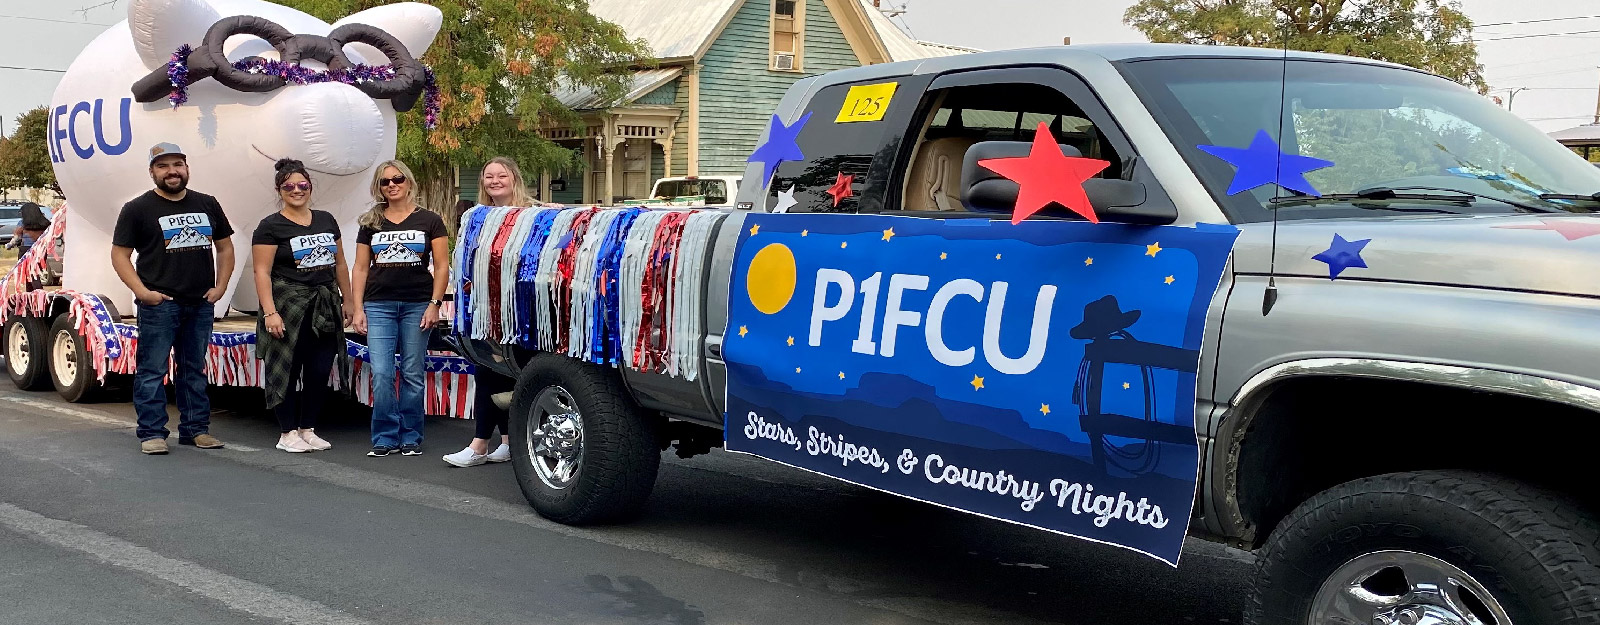 P1FCU float and truck in parade